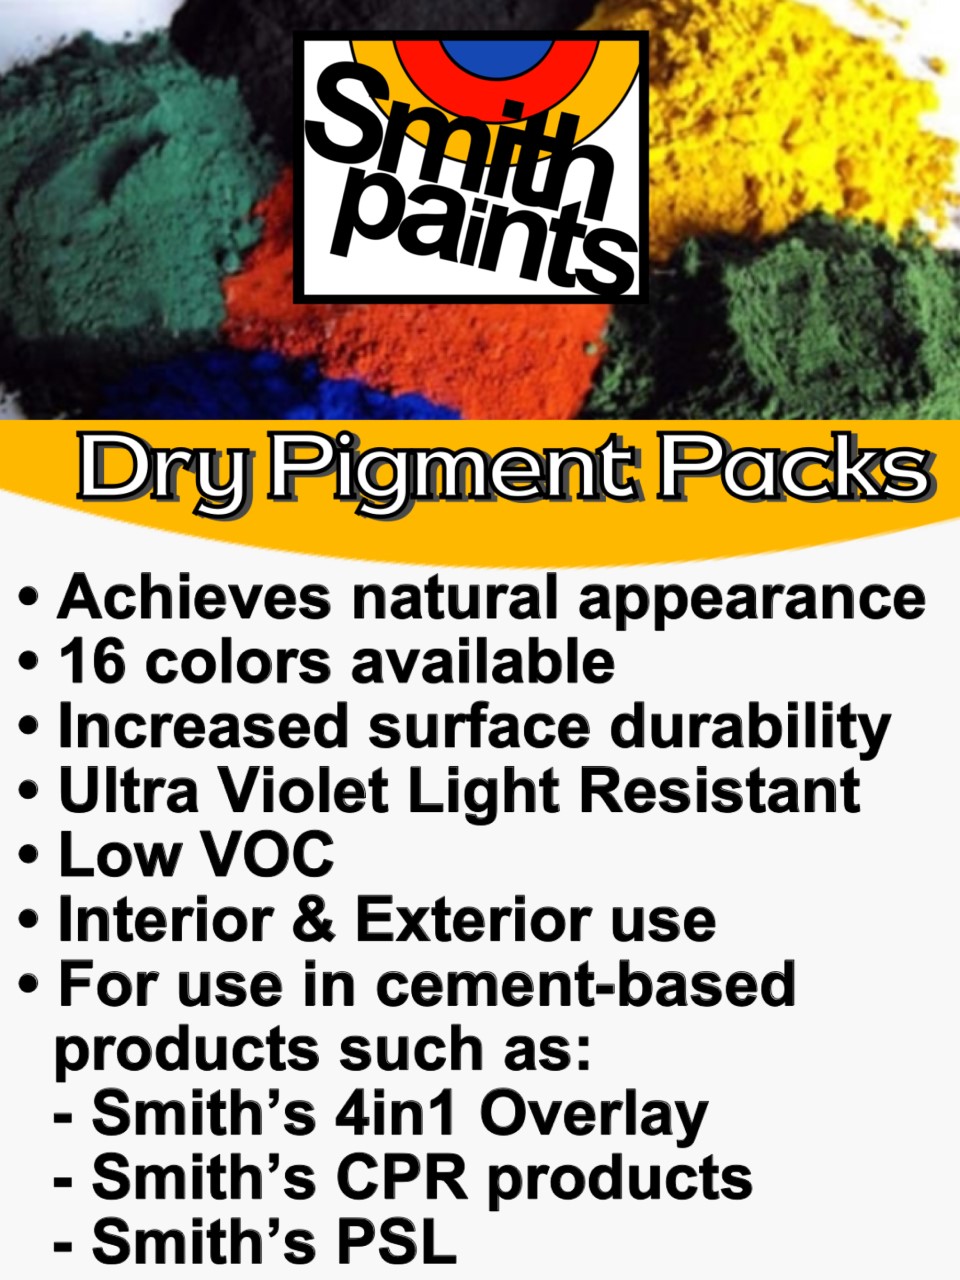 Dry Pigment Packs - Integral Powder Color Packs for Cementitious 